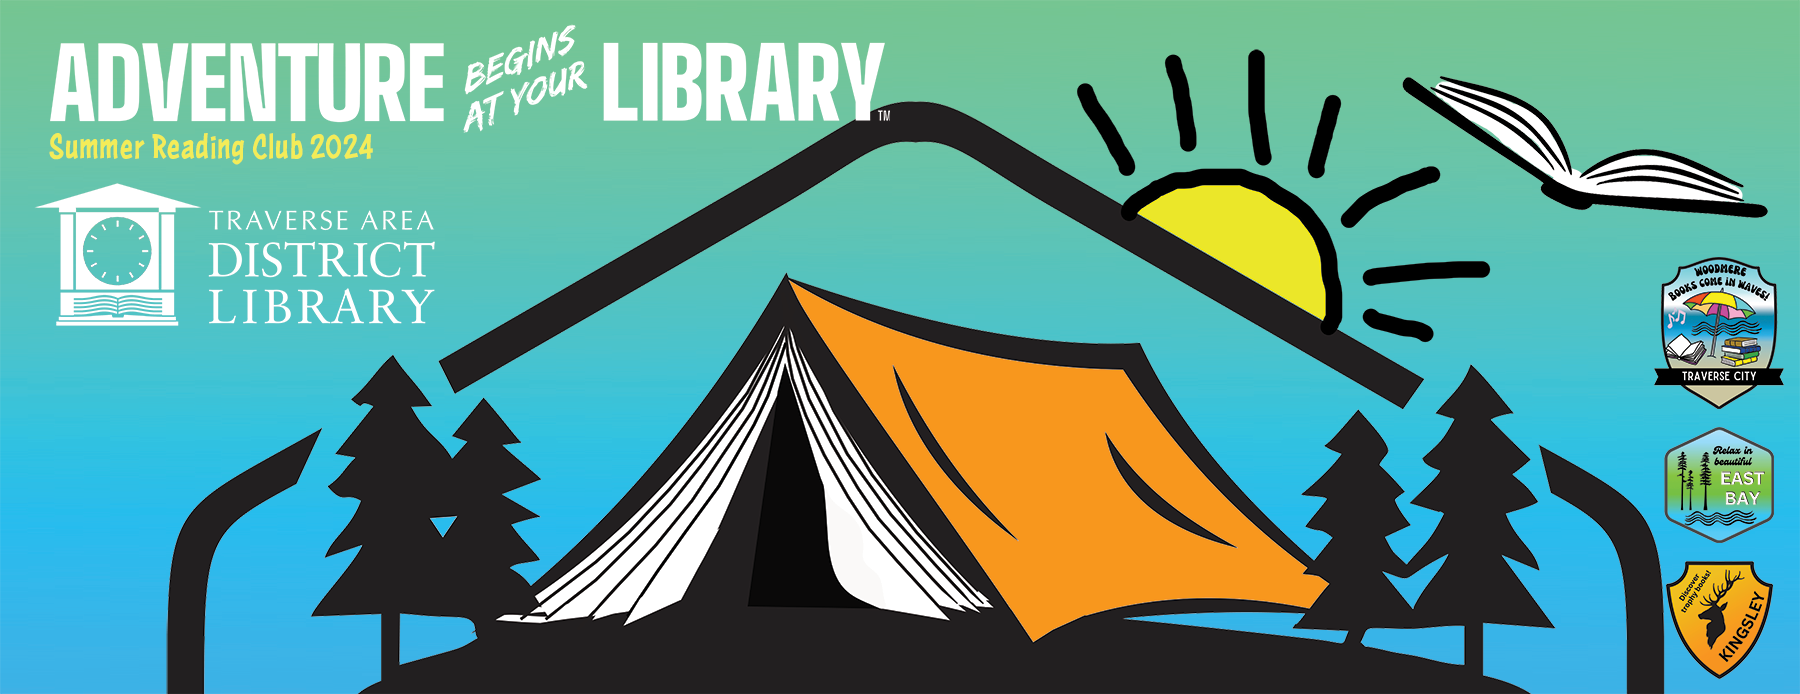 Adventure Begins at Your Library - Summer Reading Cllub